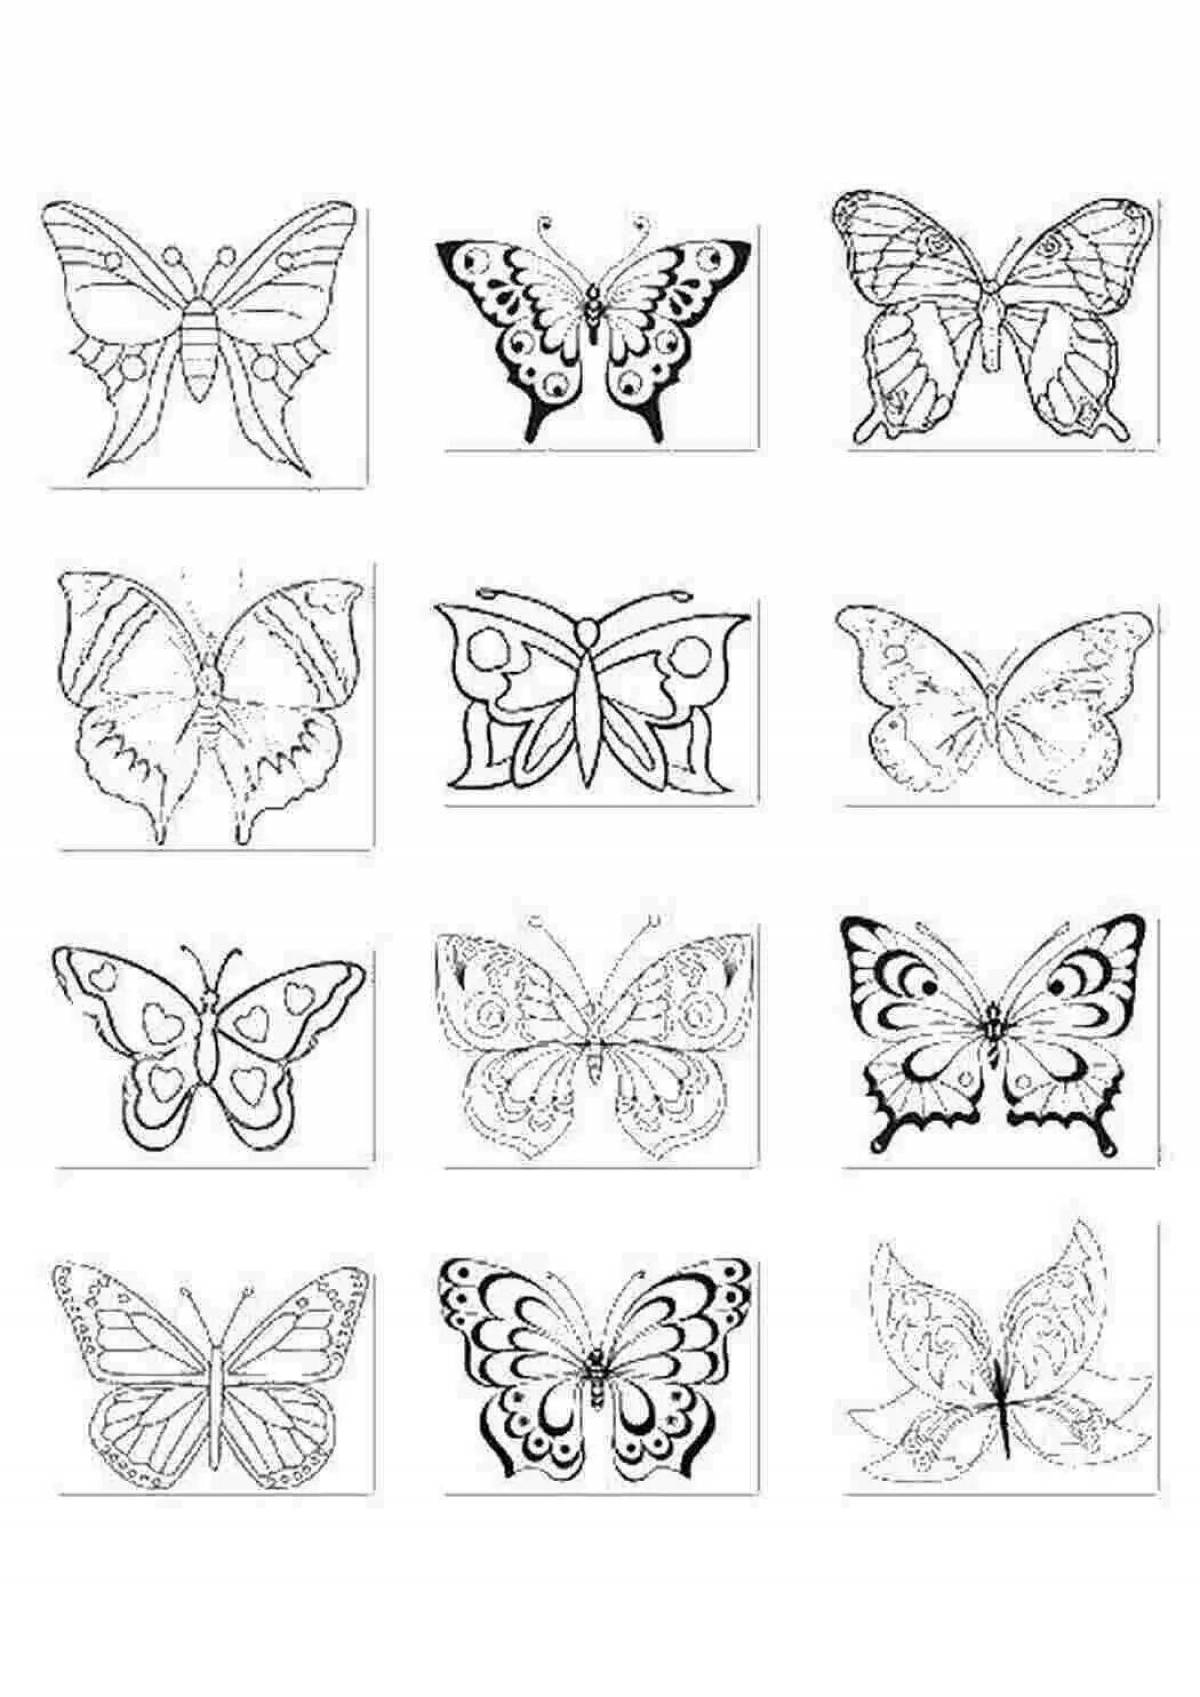 Sparkly little butterflies coloring book